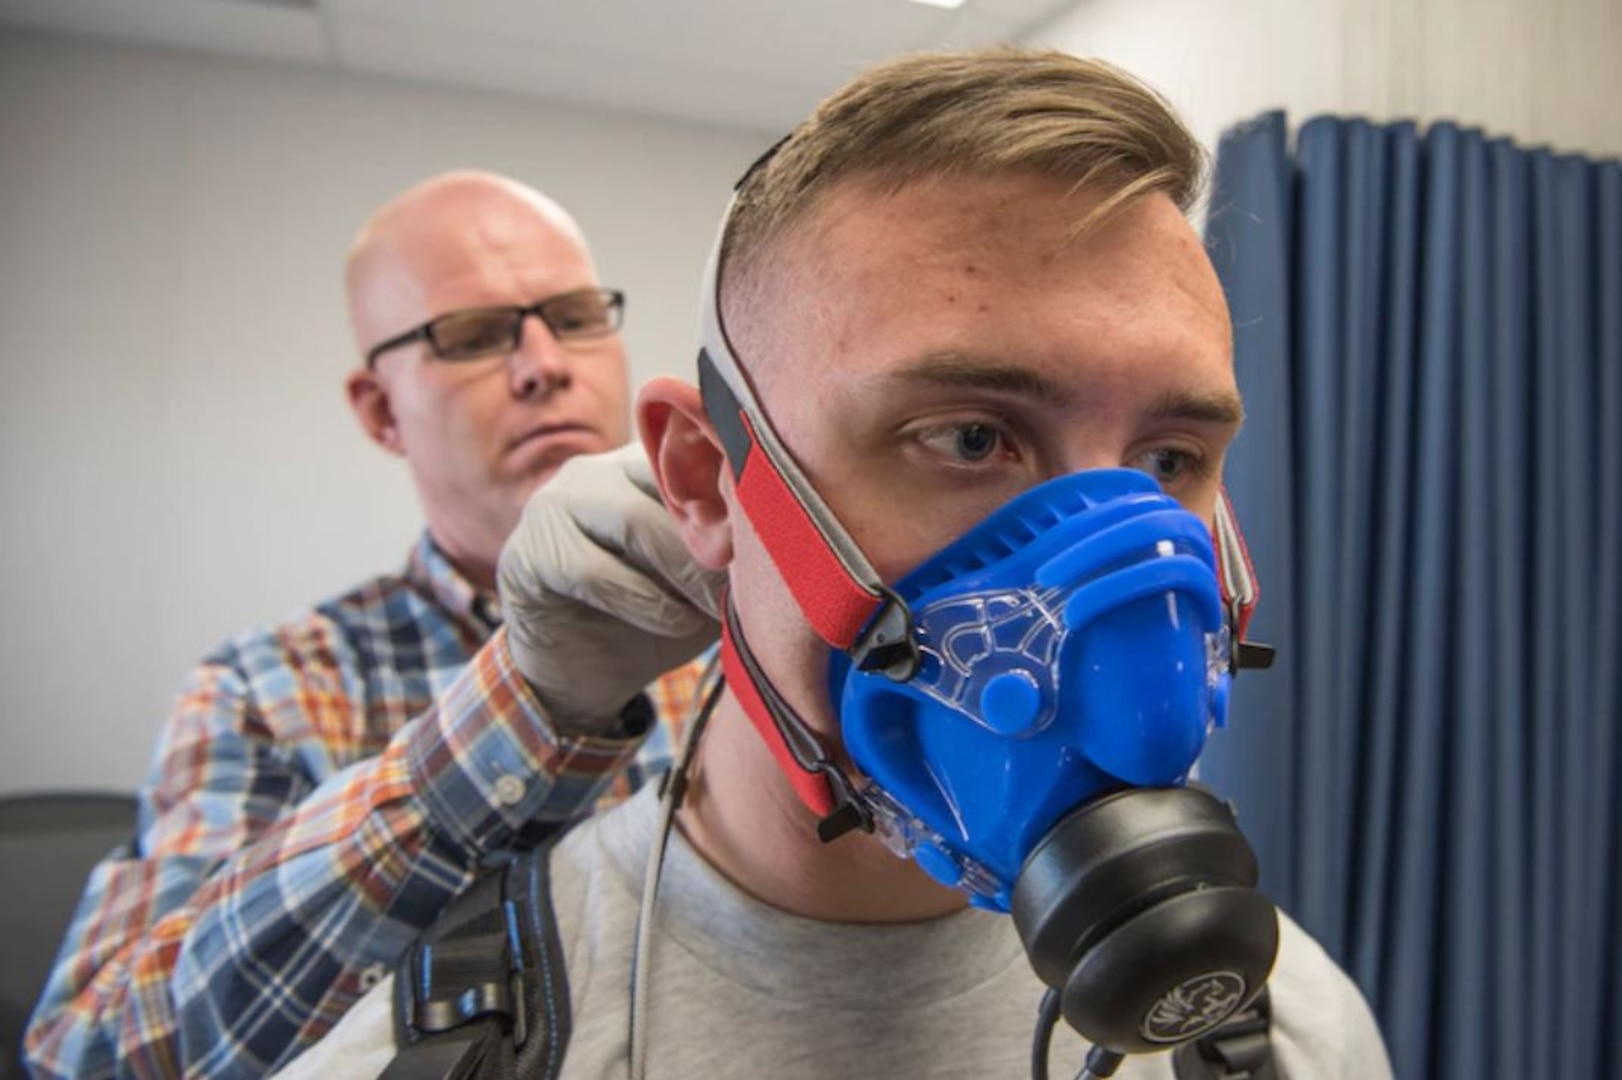 William Goins, 21st Medical Group health promotions flight commander and certified exercise physiologist, attaches a ventilation mask to 2nd Lt. Michael Horvat, 2nd Space Operations Squadron mission analyst, before a VO2 test inside Building 135 at Schriever Air Force Base, Colorado, Oct. 25, 2018. VO2 is the name for the equation which determines an individual’s maximum oxygen consumption. It is essential to knowing one’s physical endurance, as the higher the VO2, the longer a person can endure strenuous exercise. (U.S. Air Force photo by Senior Airman William Tracy)